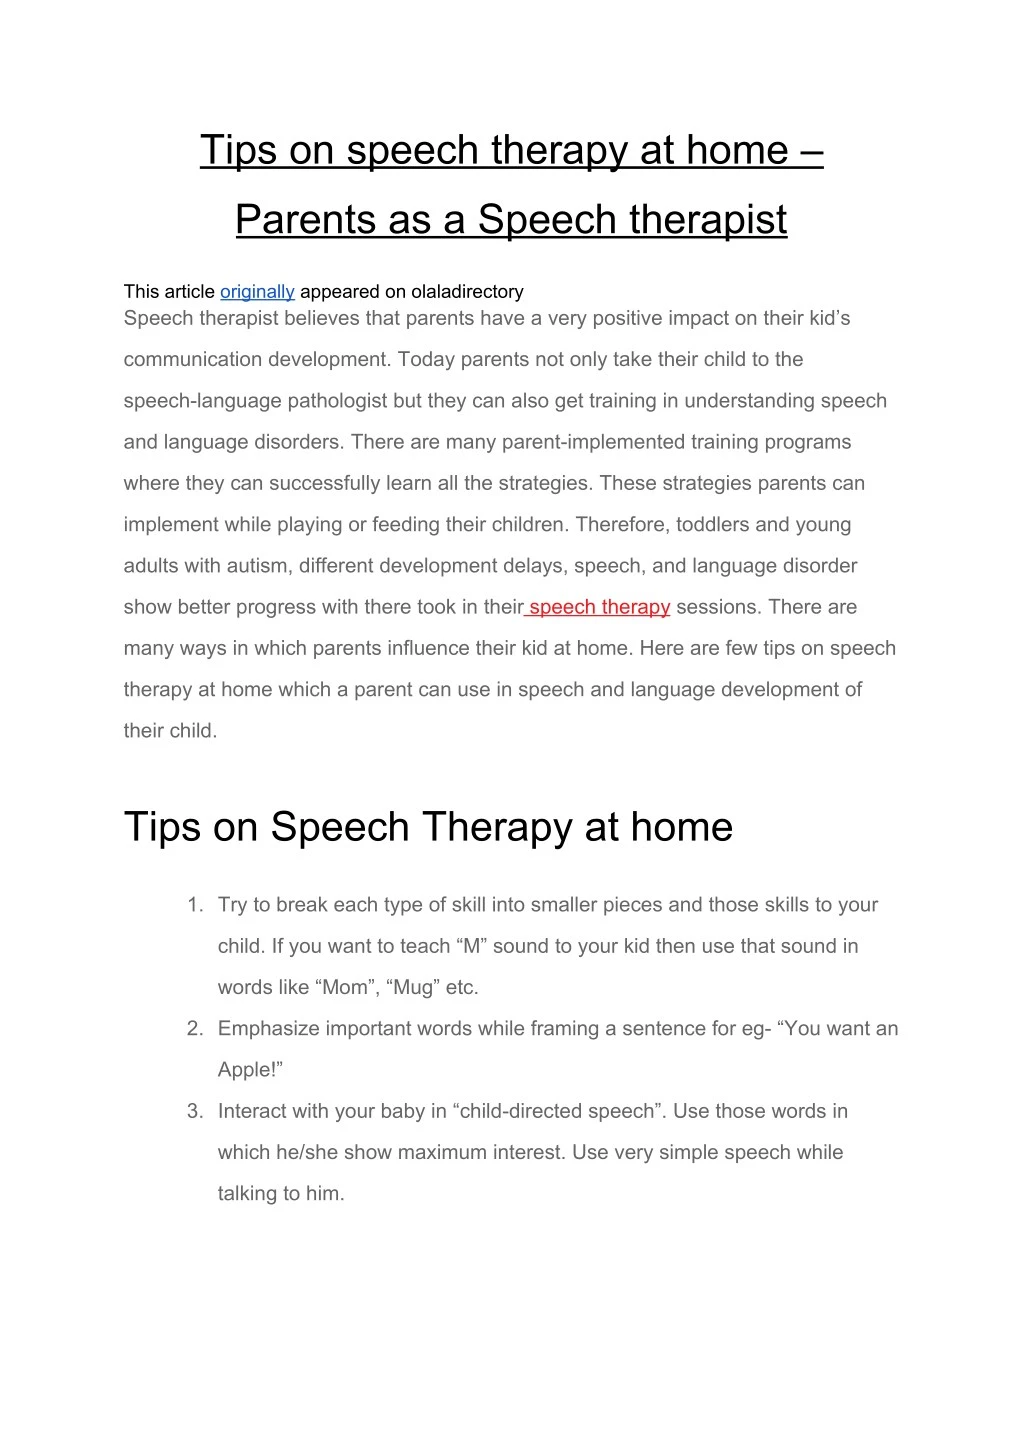 tips on speech therapy at home